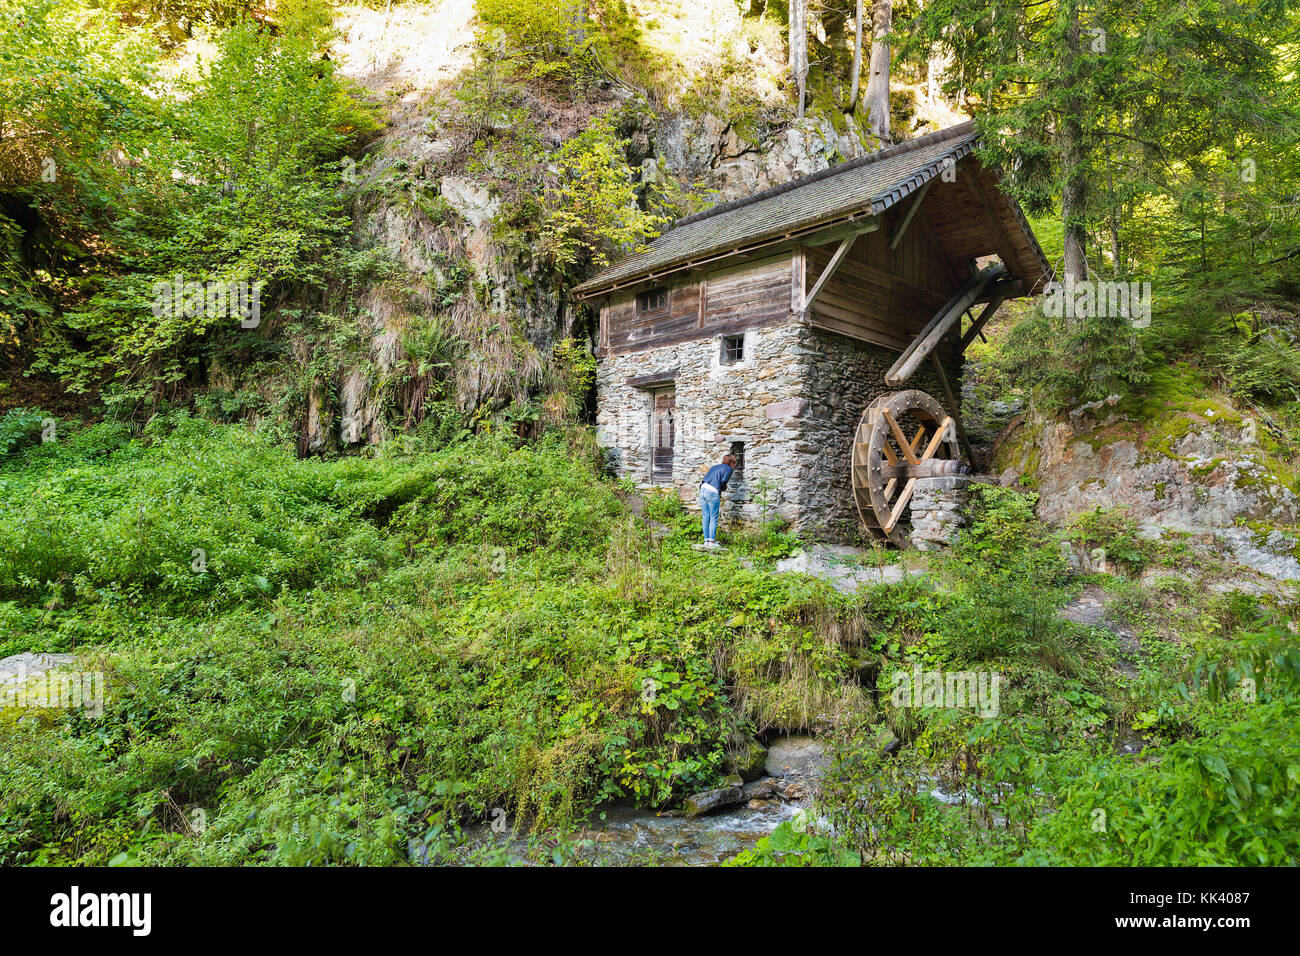 Alpine landscape with old water mill in the forest thicket. Woman tourist peek into window. Western Carinthia, Austria. Stock Photo